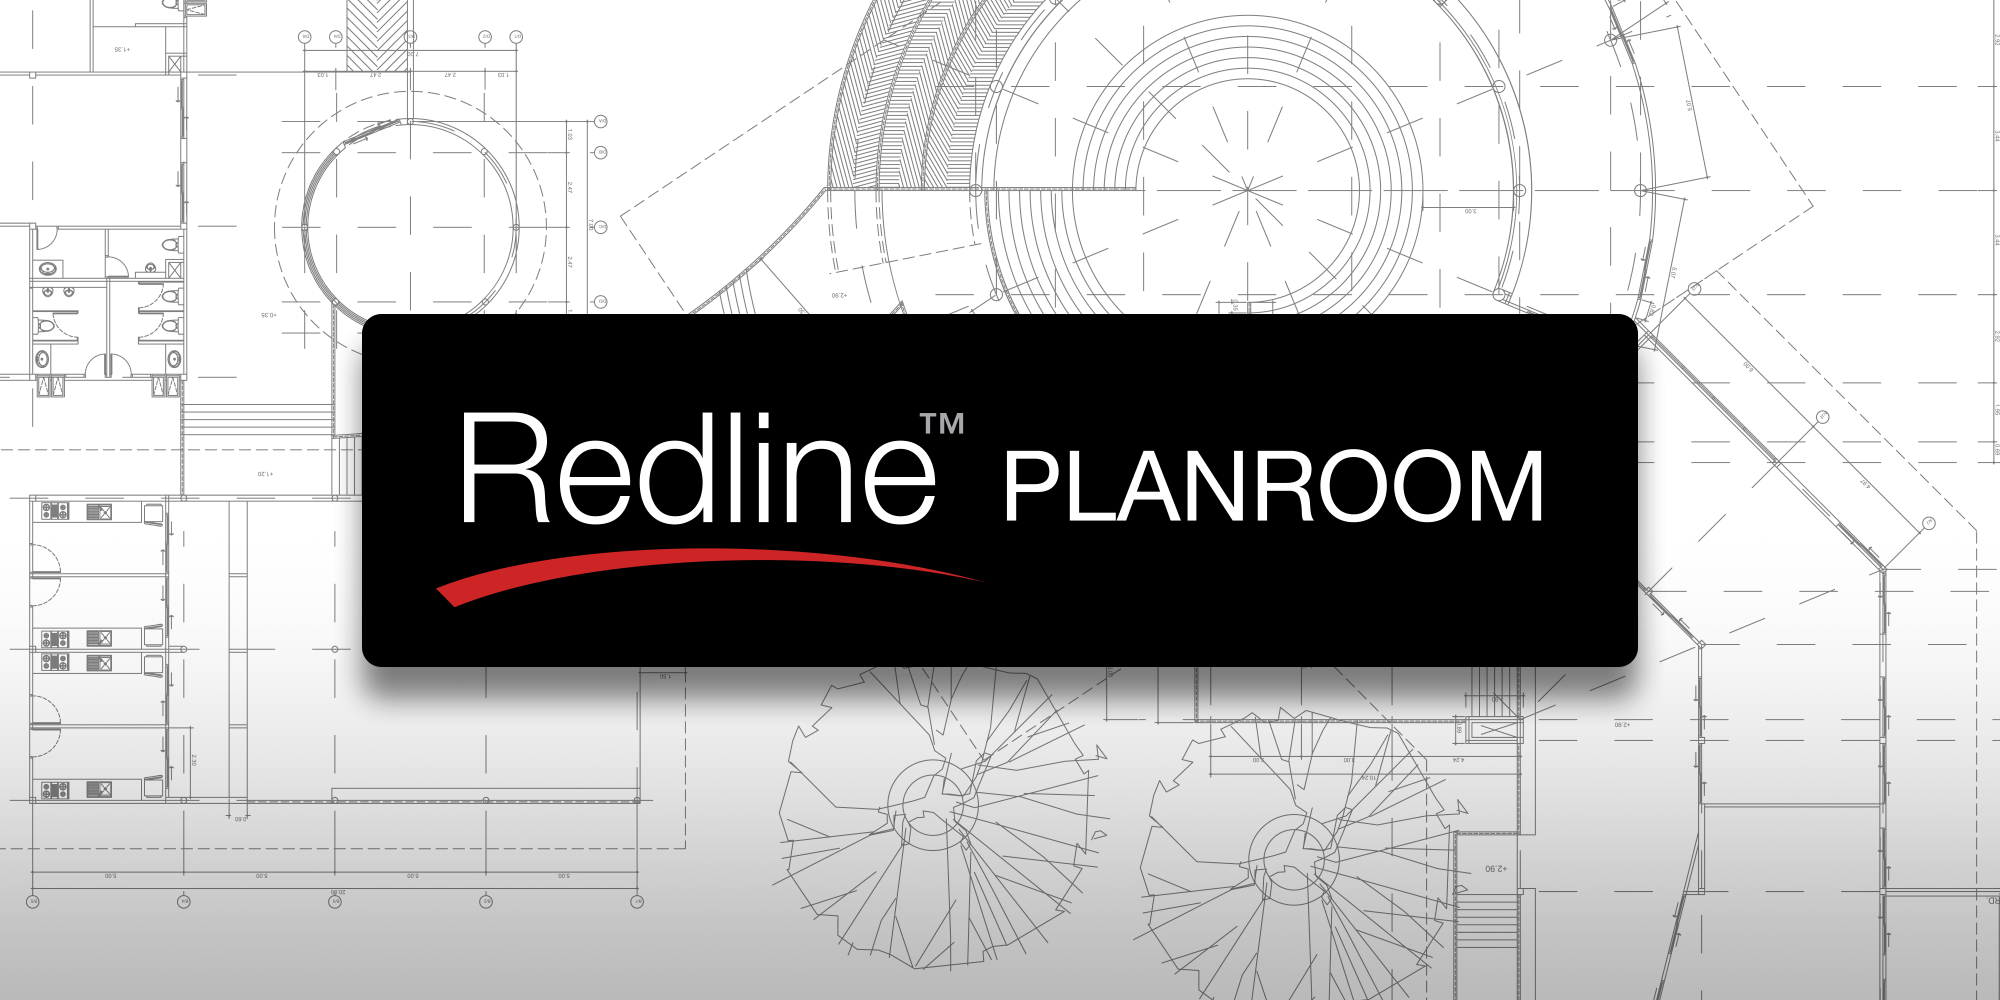 Intuitive Updates to Construction Plan Management Tools Extend Access to All Plan Version Sets | Construction Markup Software | Online Construction Plans | Construction Takeoff Software | Redline Planroom | Redline Takeoff | UDA ConstructionOnline